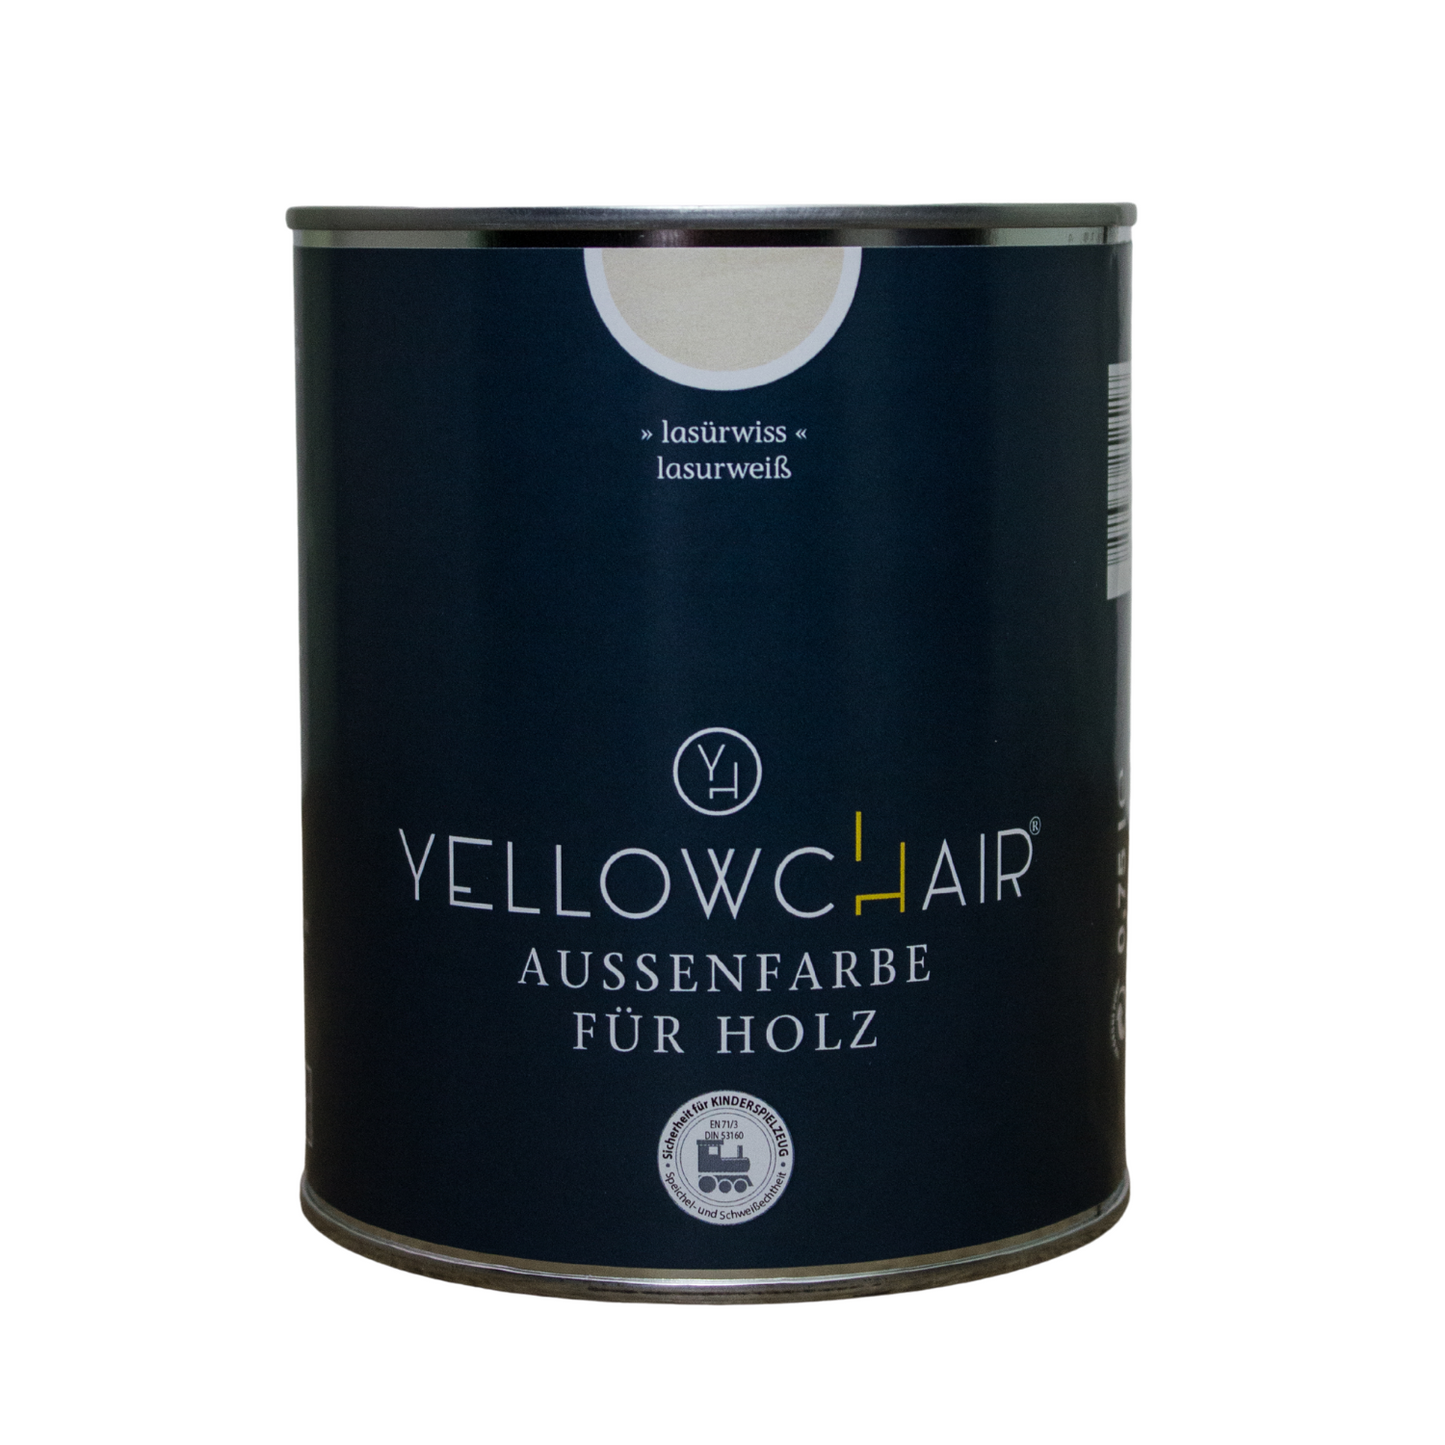 yellowchair exterior color for wood Translucent white / Translucent white